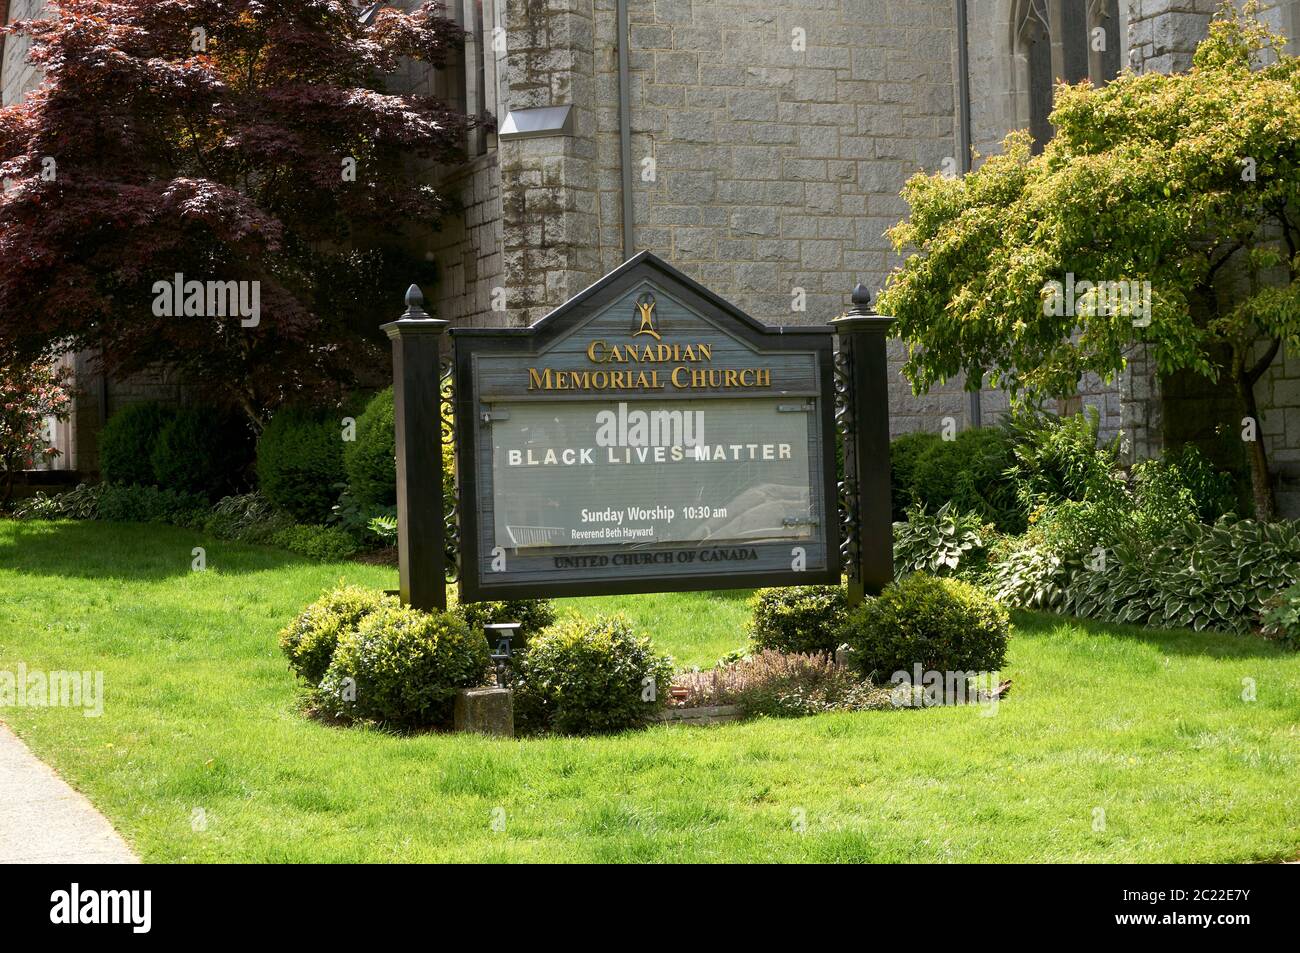 Black Lives Matter sign outside Canadian Memorial Church in Vancouver, BC, Canada Stock Photo